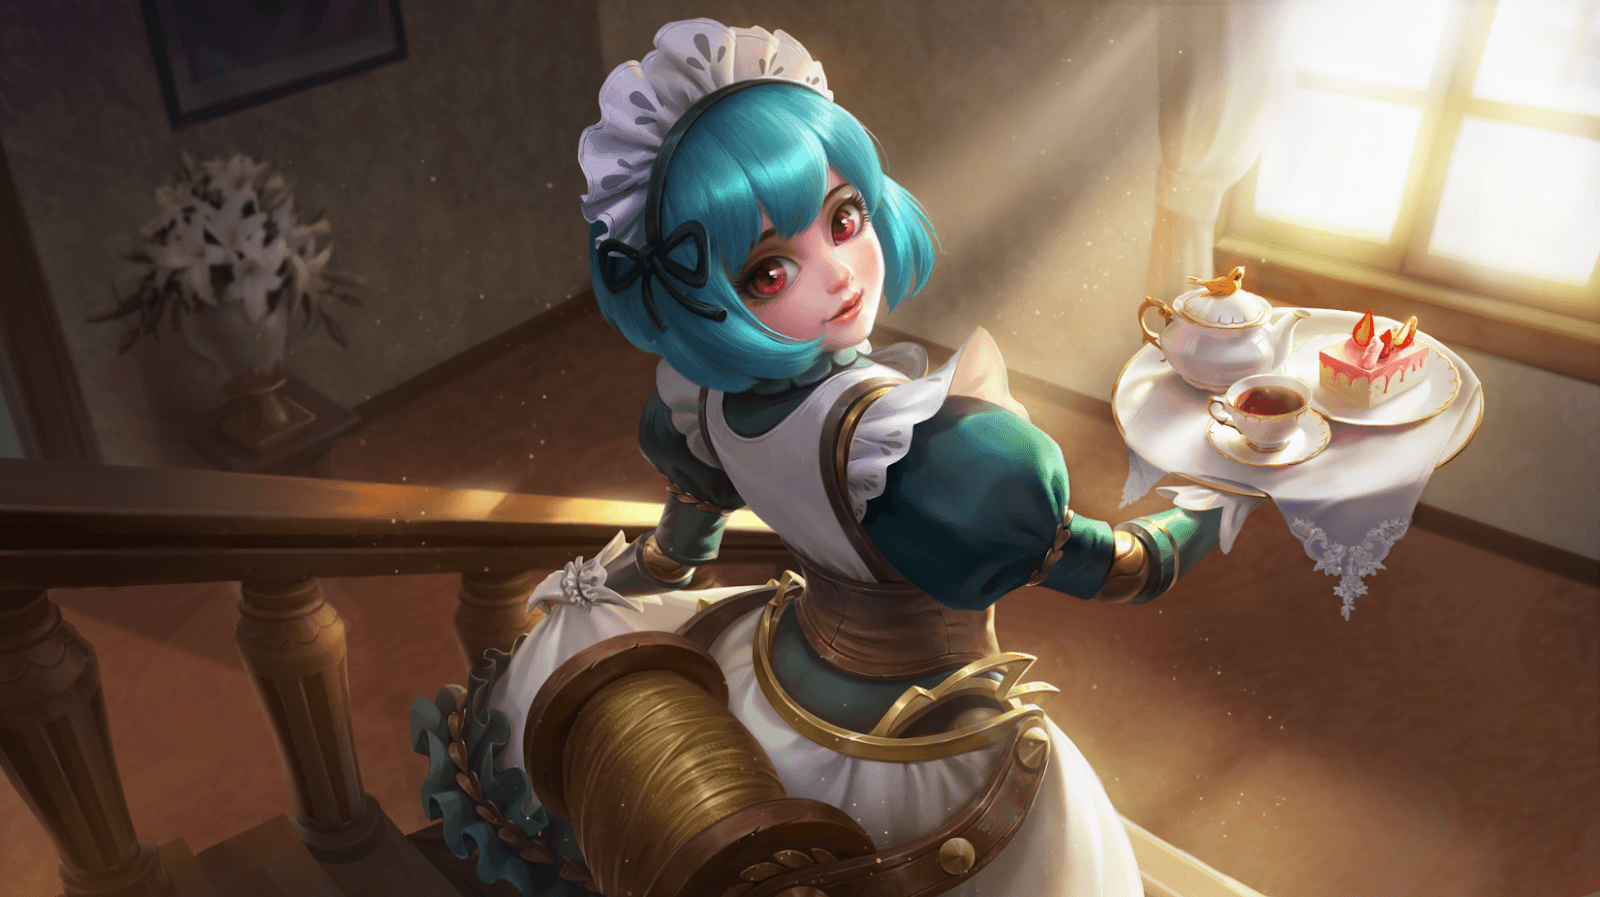 Best Mobile Legends Heroes Wallpapers. You Must Have This!